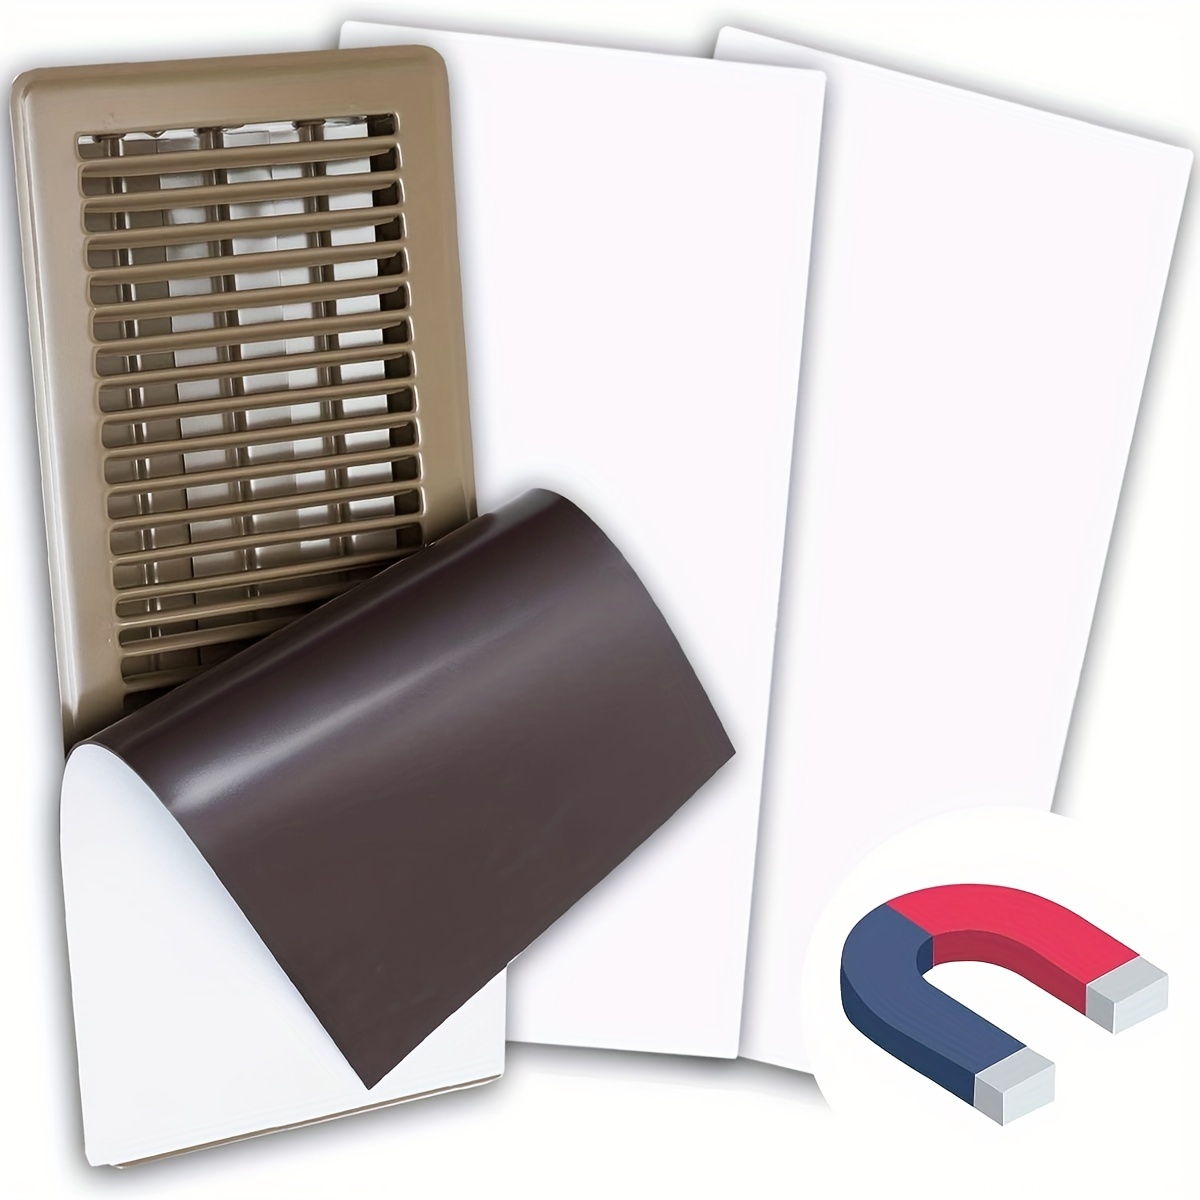 Strong Magnetic Vent Covers Vent Covers For Home - Temu